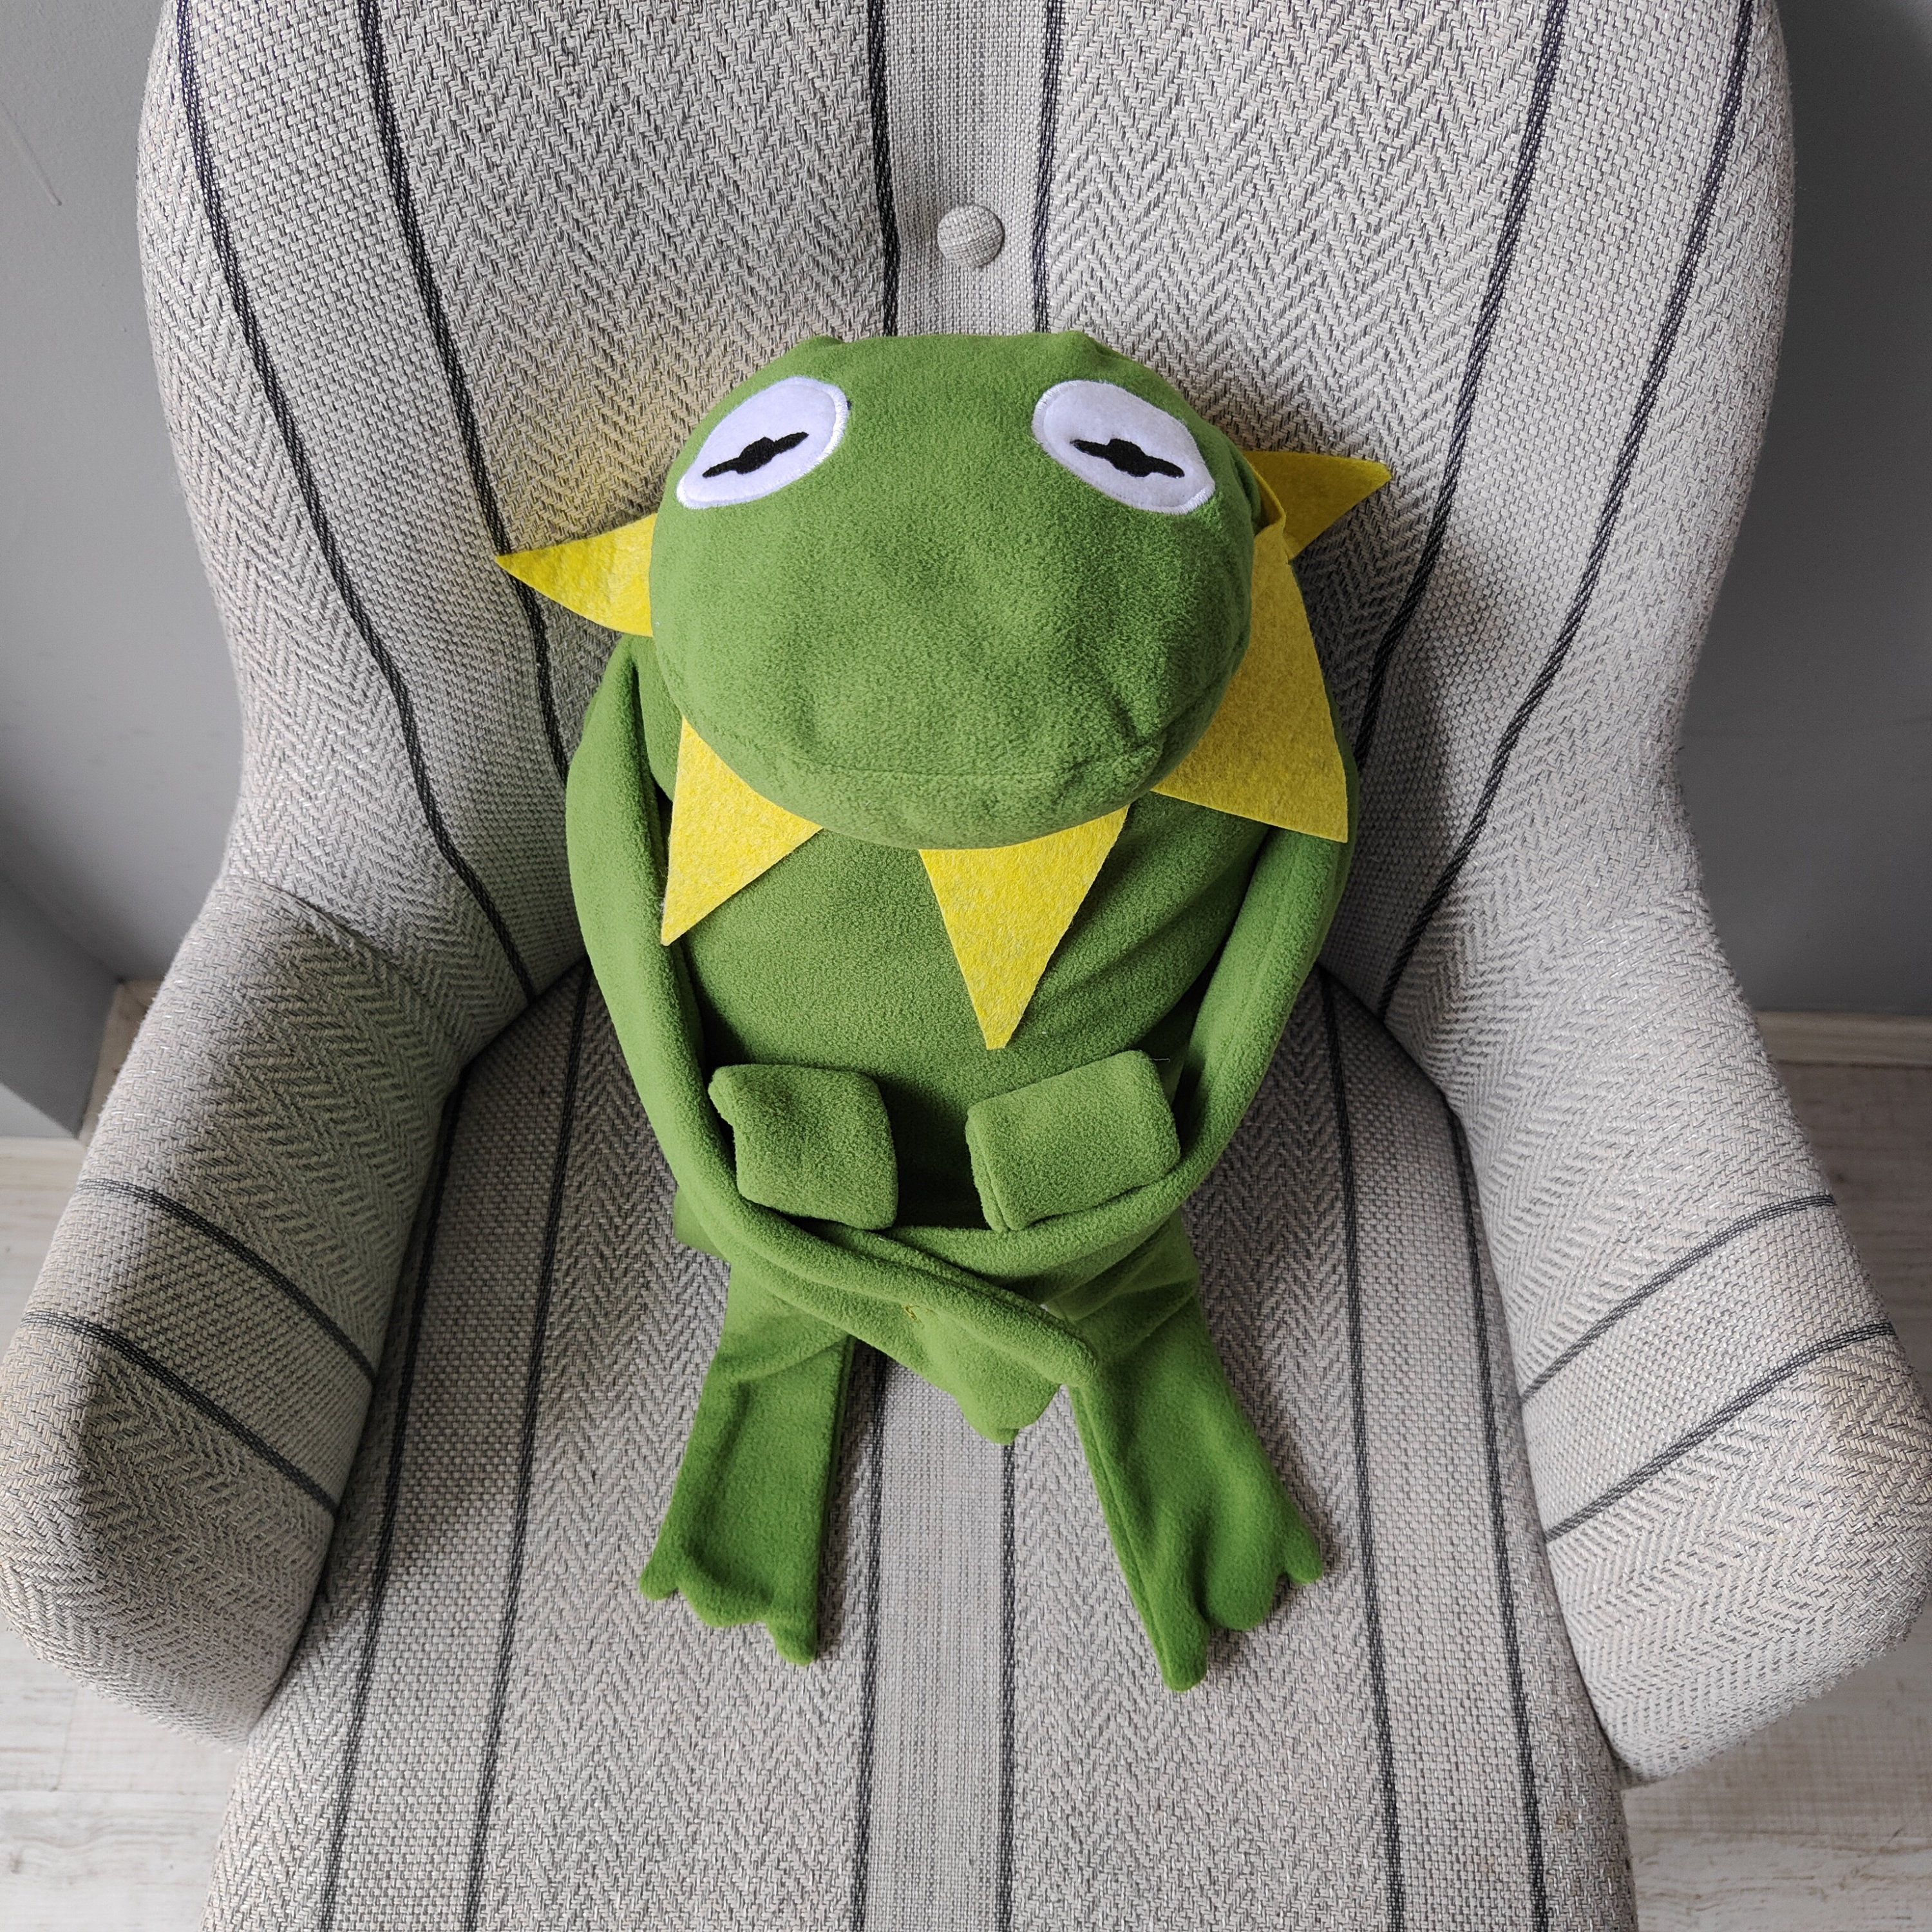 The Frog Pillow,soft Playmate Toy,stuffed Animals Plush,funny Ornament Kids  Room Decor Gifts,cool Children&kids Birthday Gift Ideas 